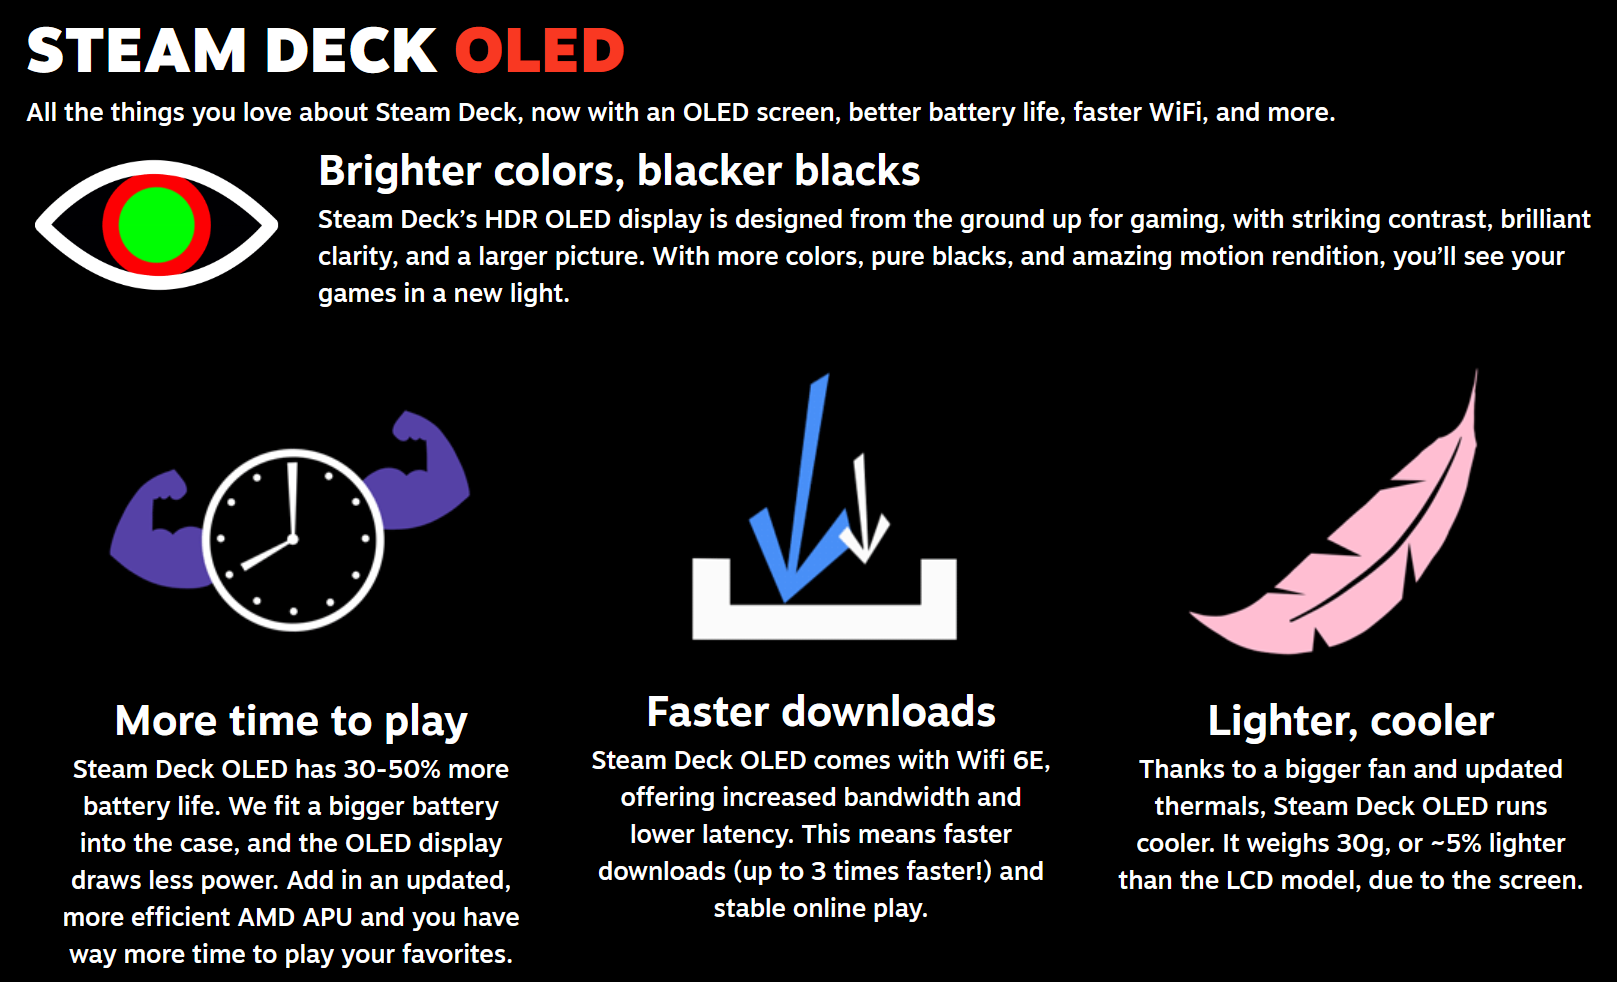 Valve's graphical elevator pitch for the new Steam Deck OLED.